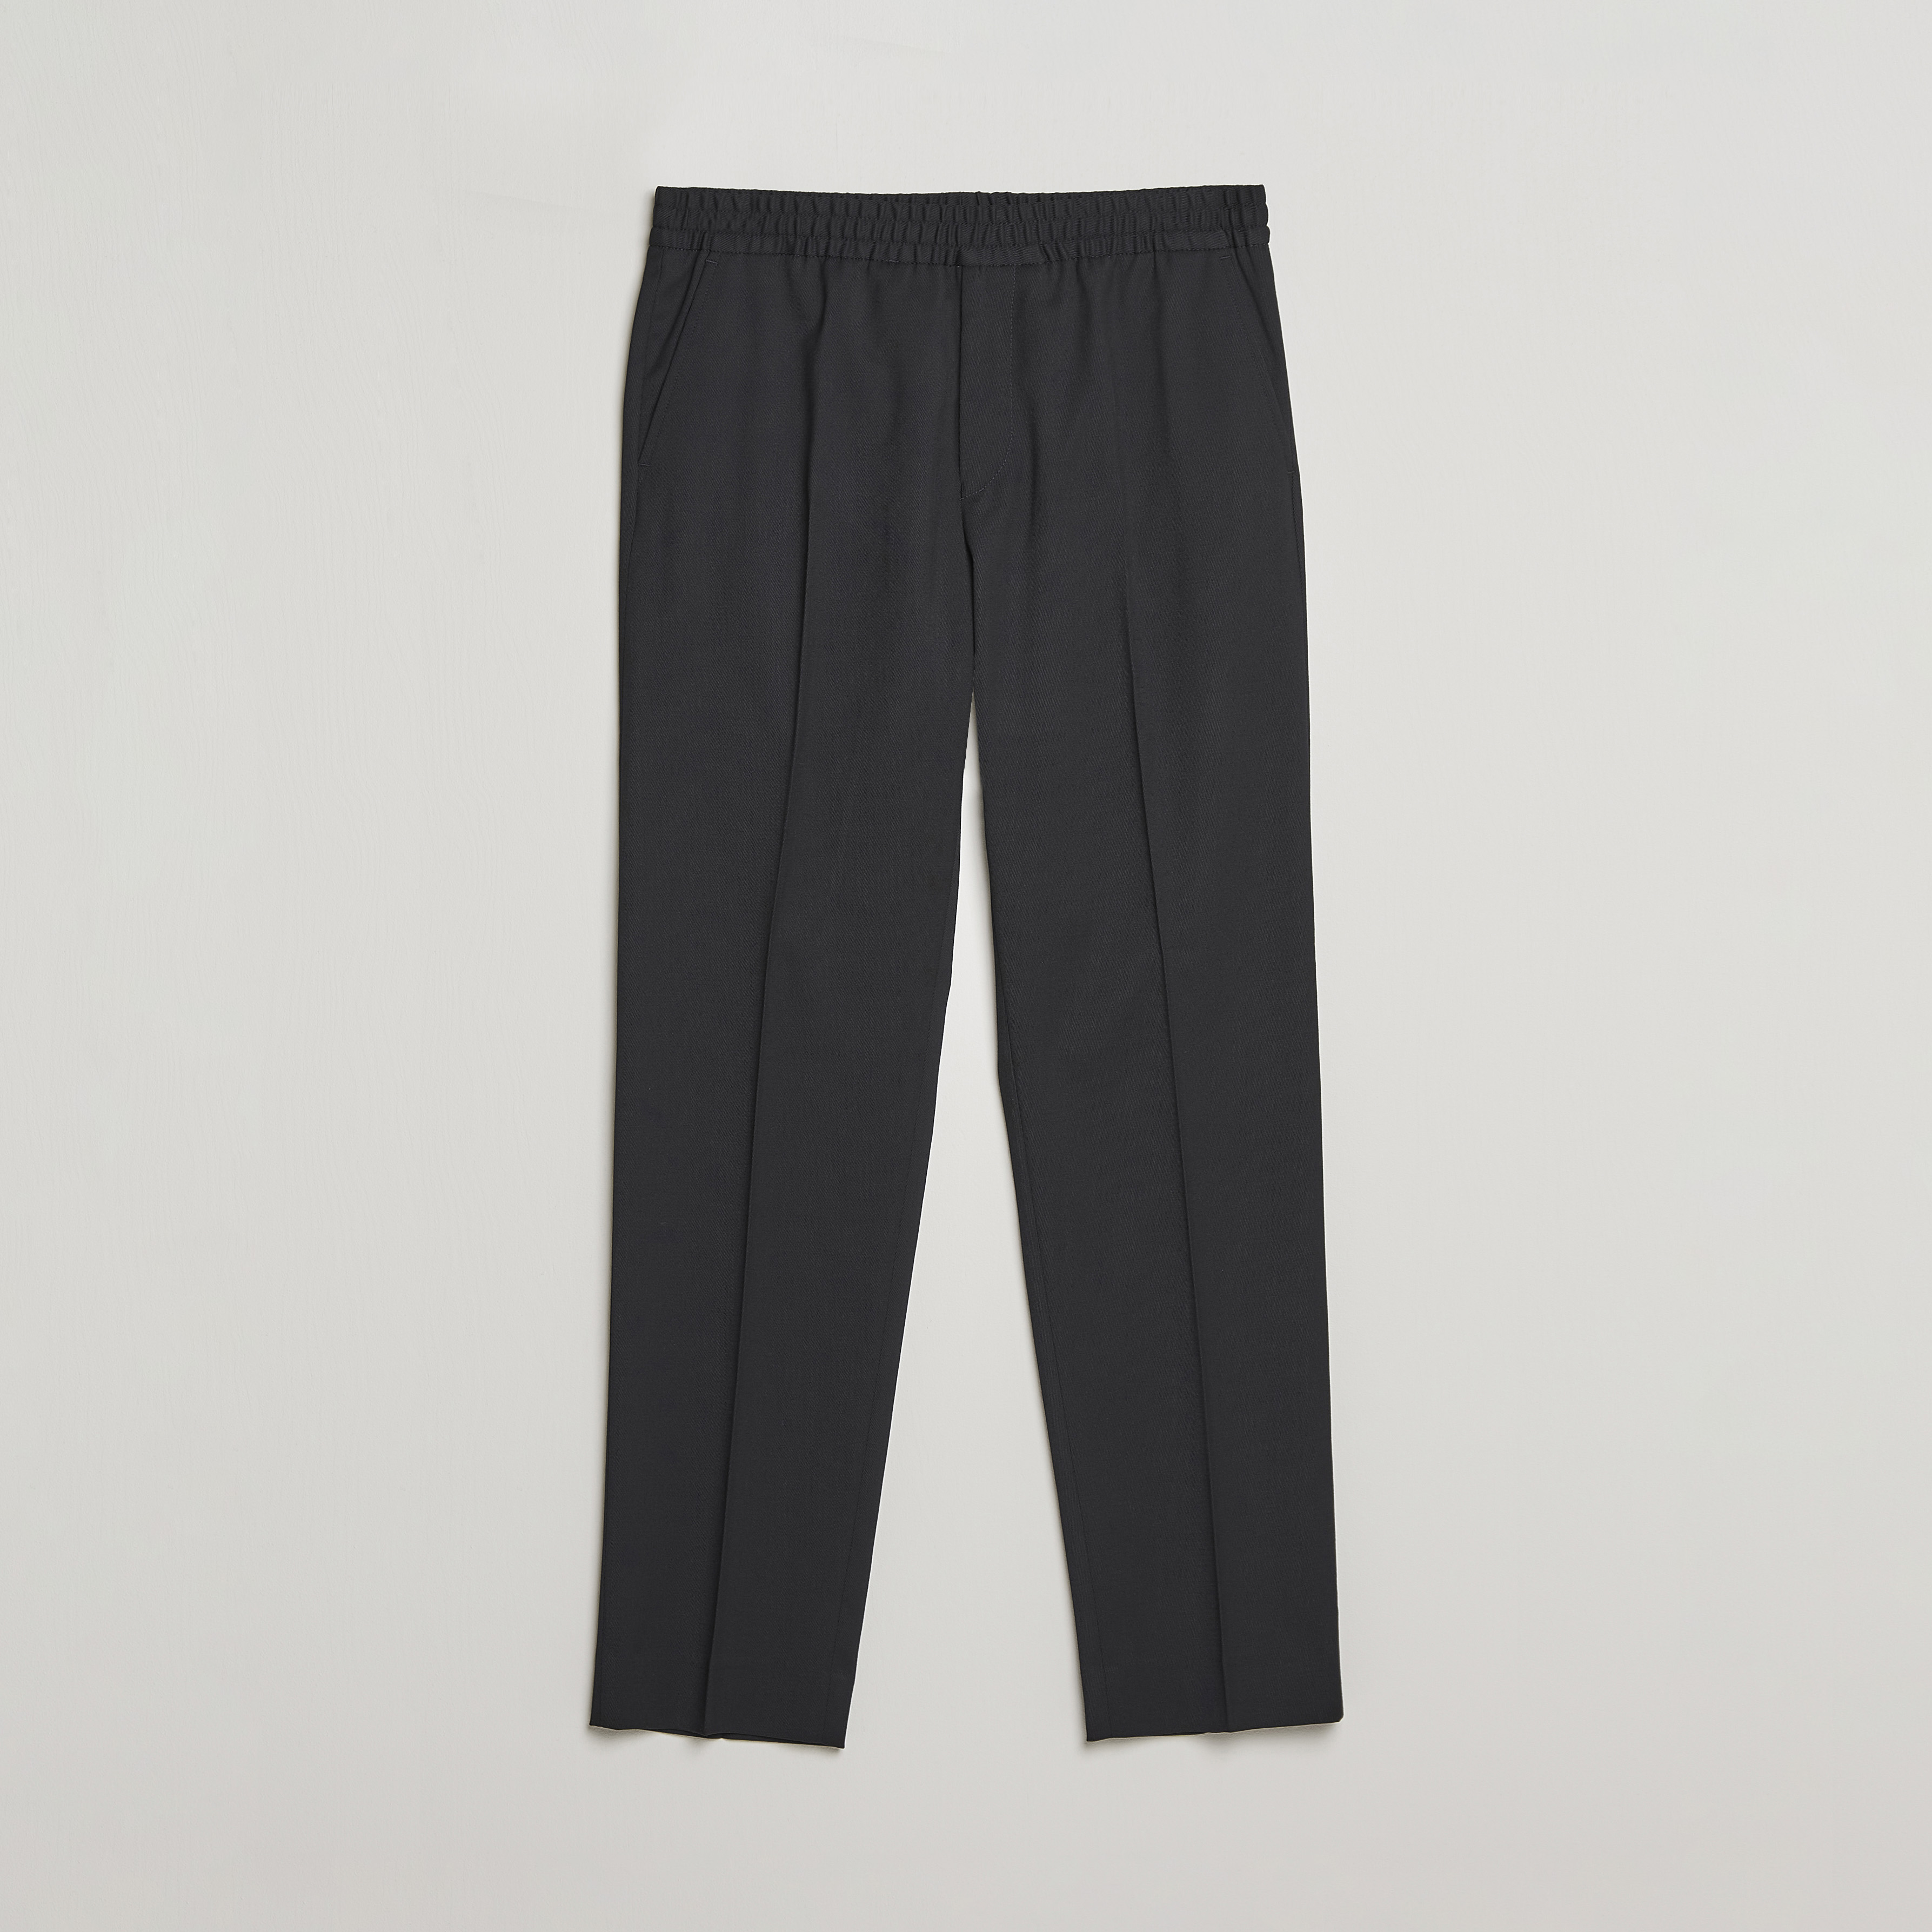 Zara 100% wool trousers with darts | Halifax Shopping Centre